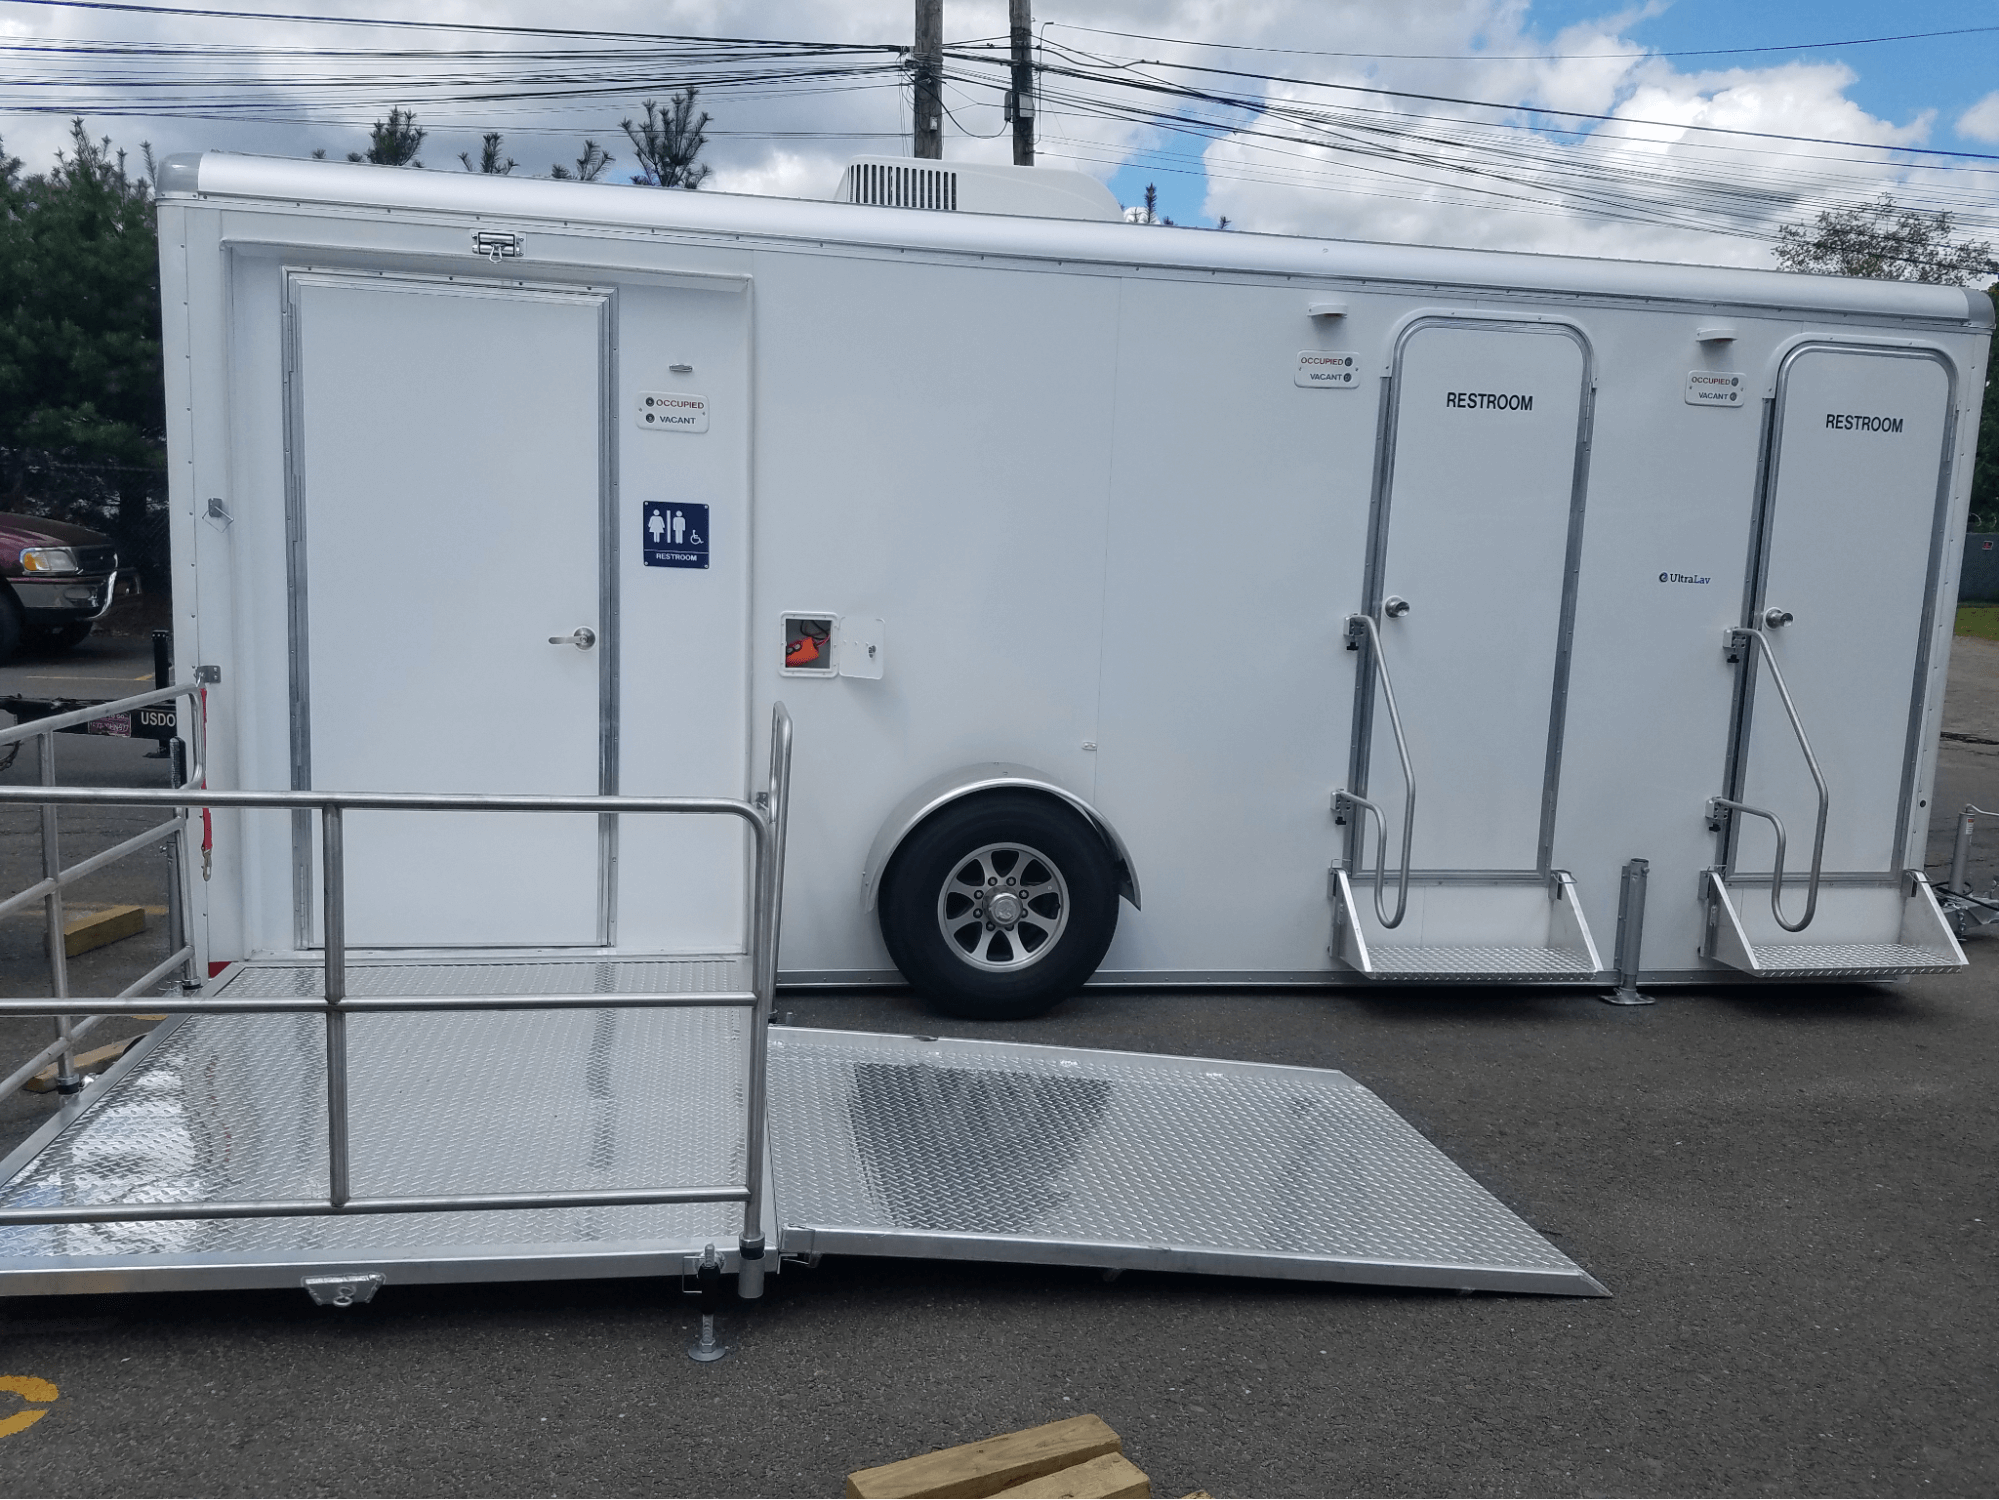 portable ADA-compliant restroom trailer with ramp for easy access